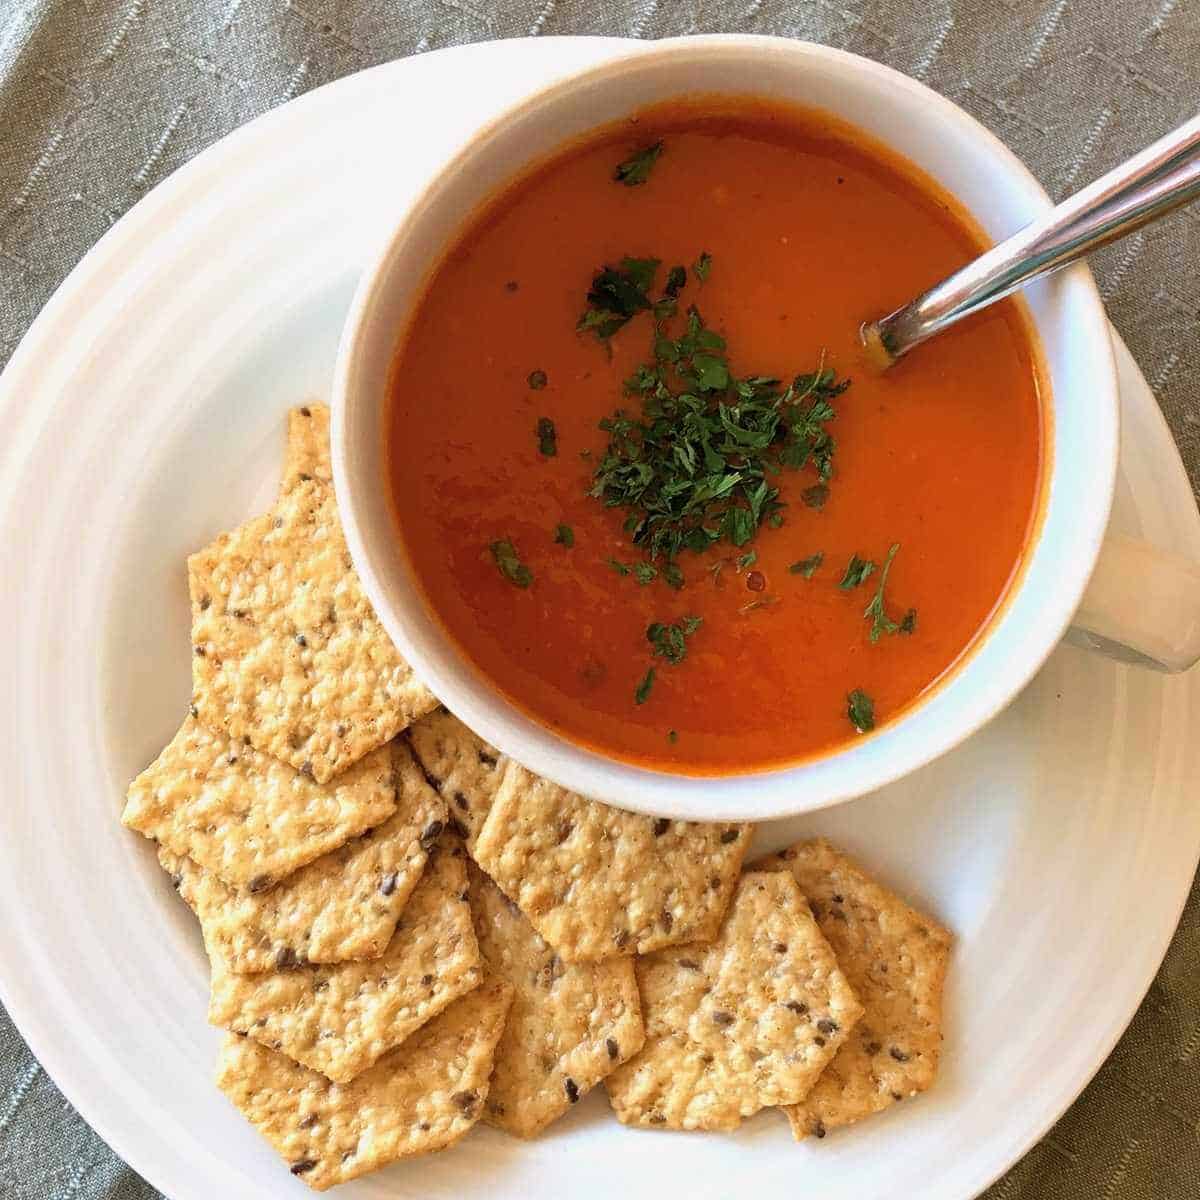 A cup of gluten free tomato soup with crackers on the side